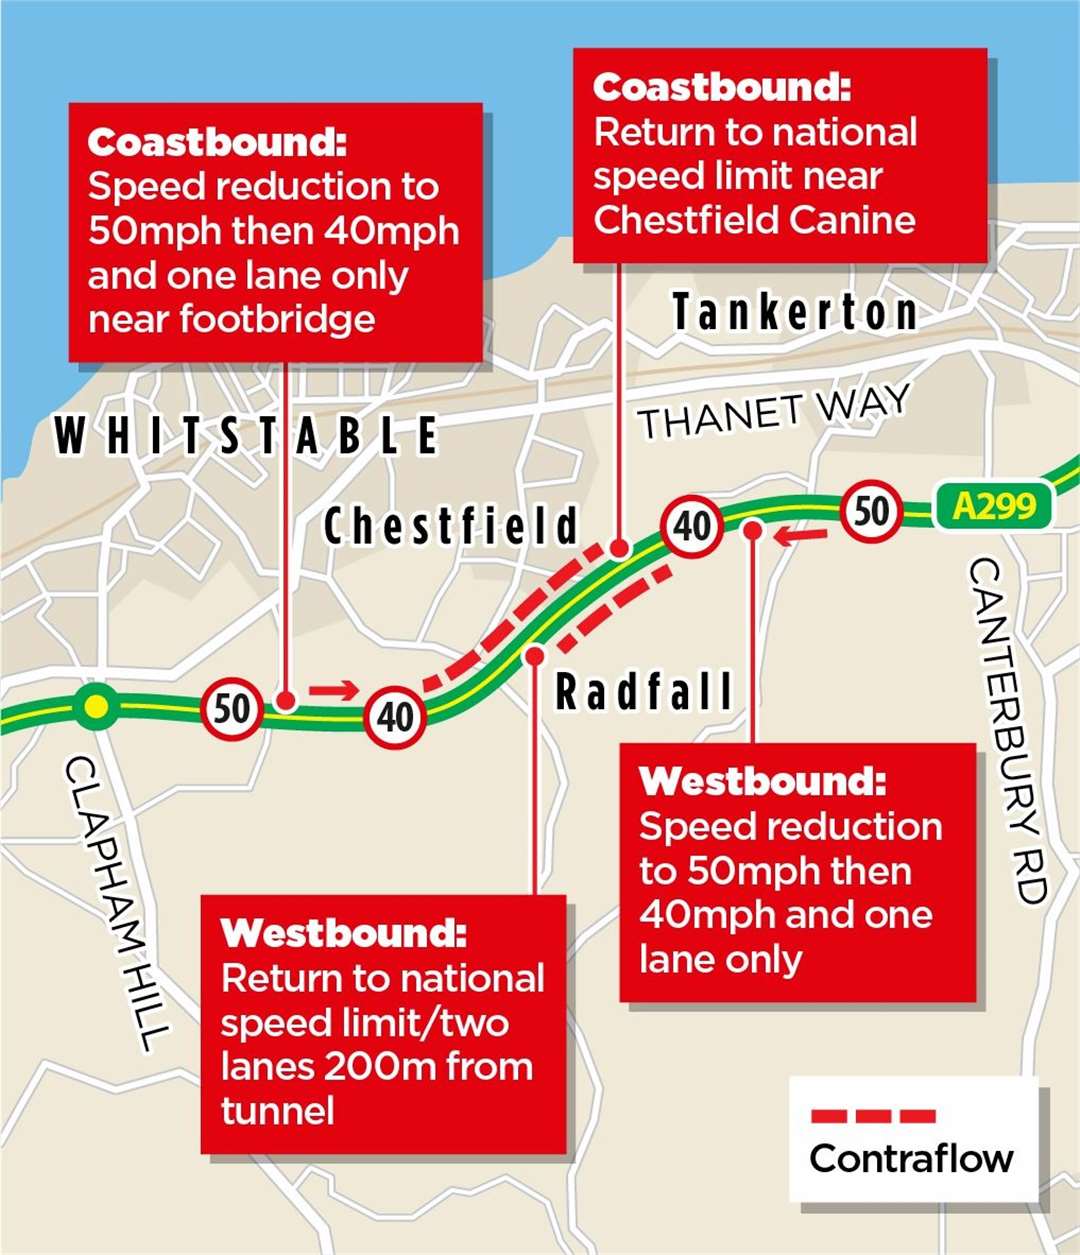 Closures and a contraflow system are planned for the stretch of Thanet Way